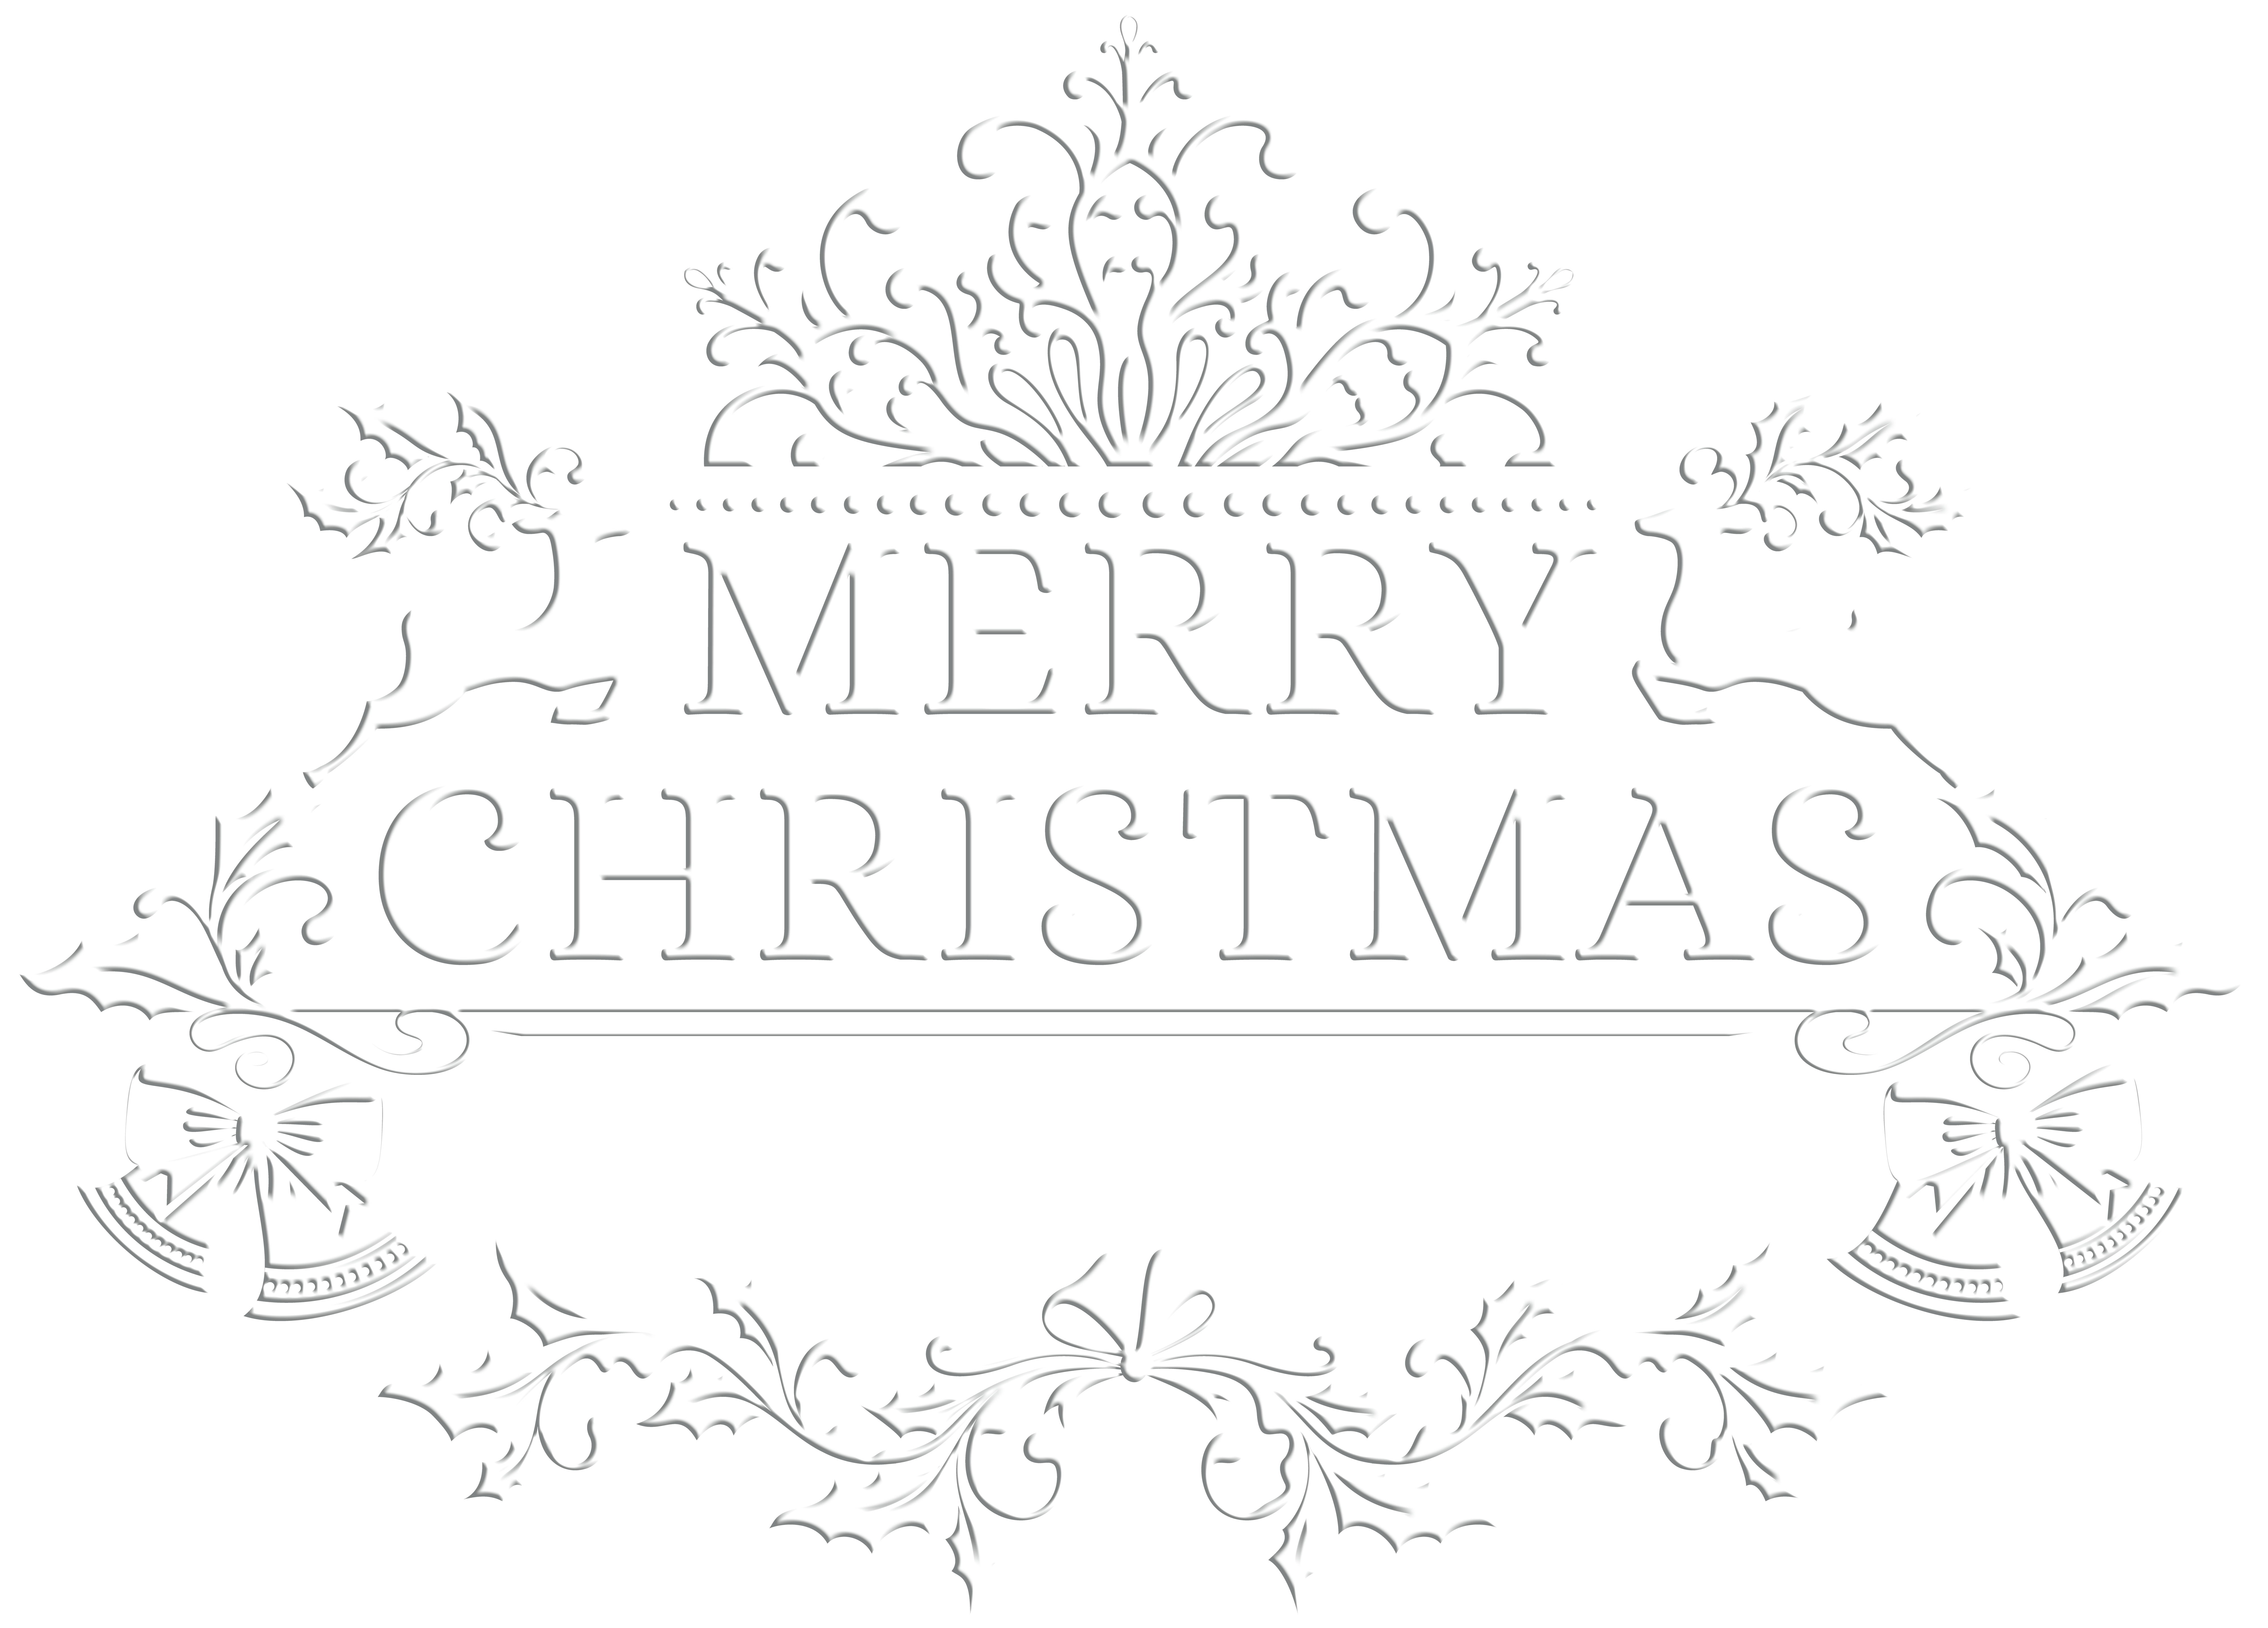 Download Merry Christmas White Transparent Png Clip Art Image Gallery Yopriceville High Quality Images And Transparent Png Free Clipart SVG Cut Files